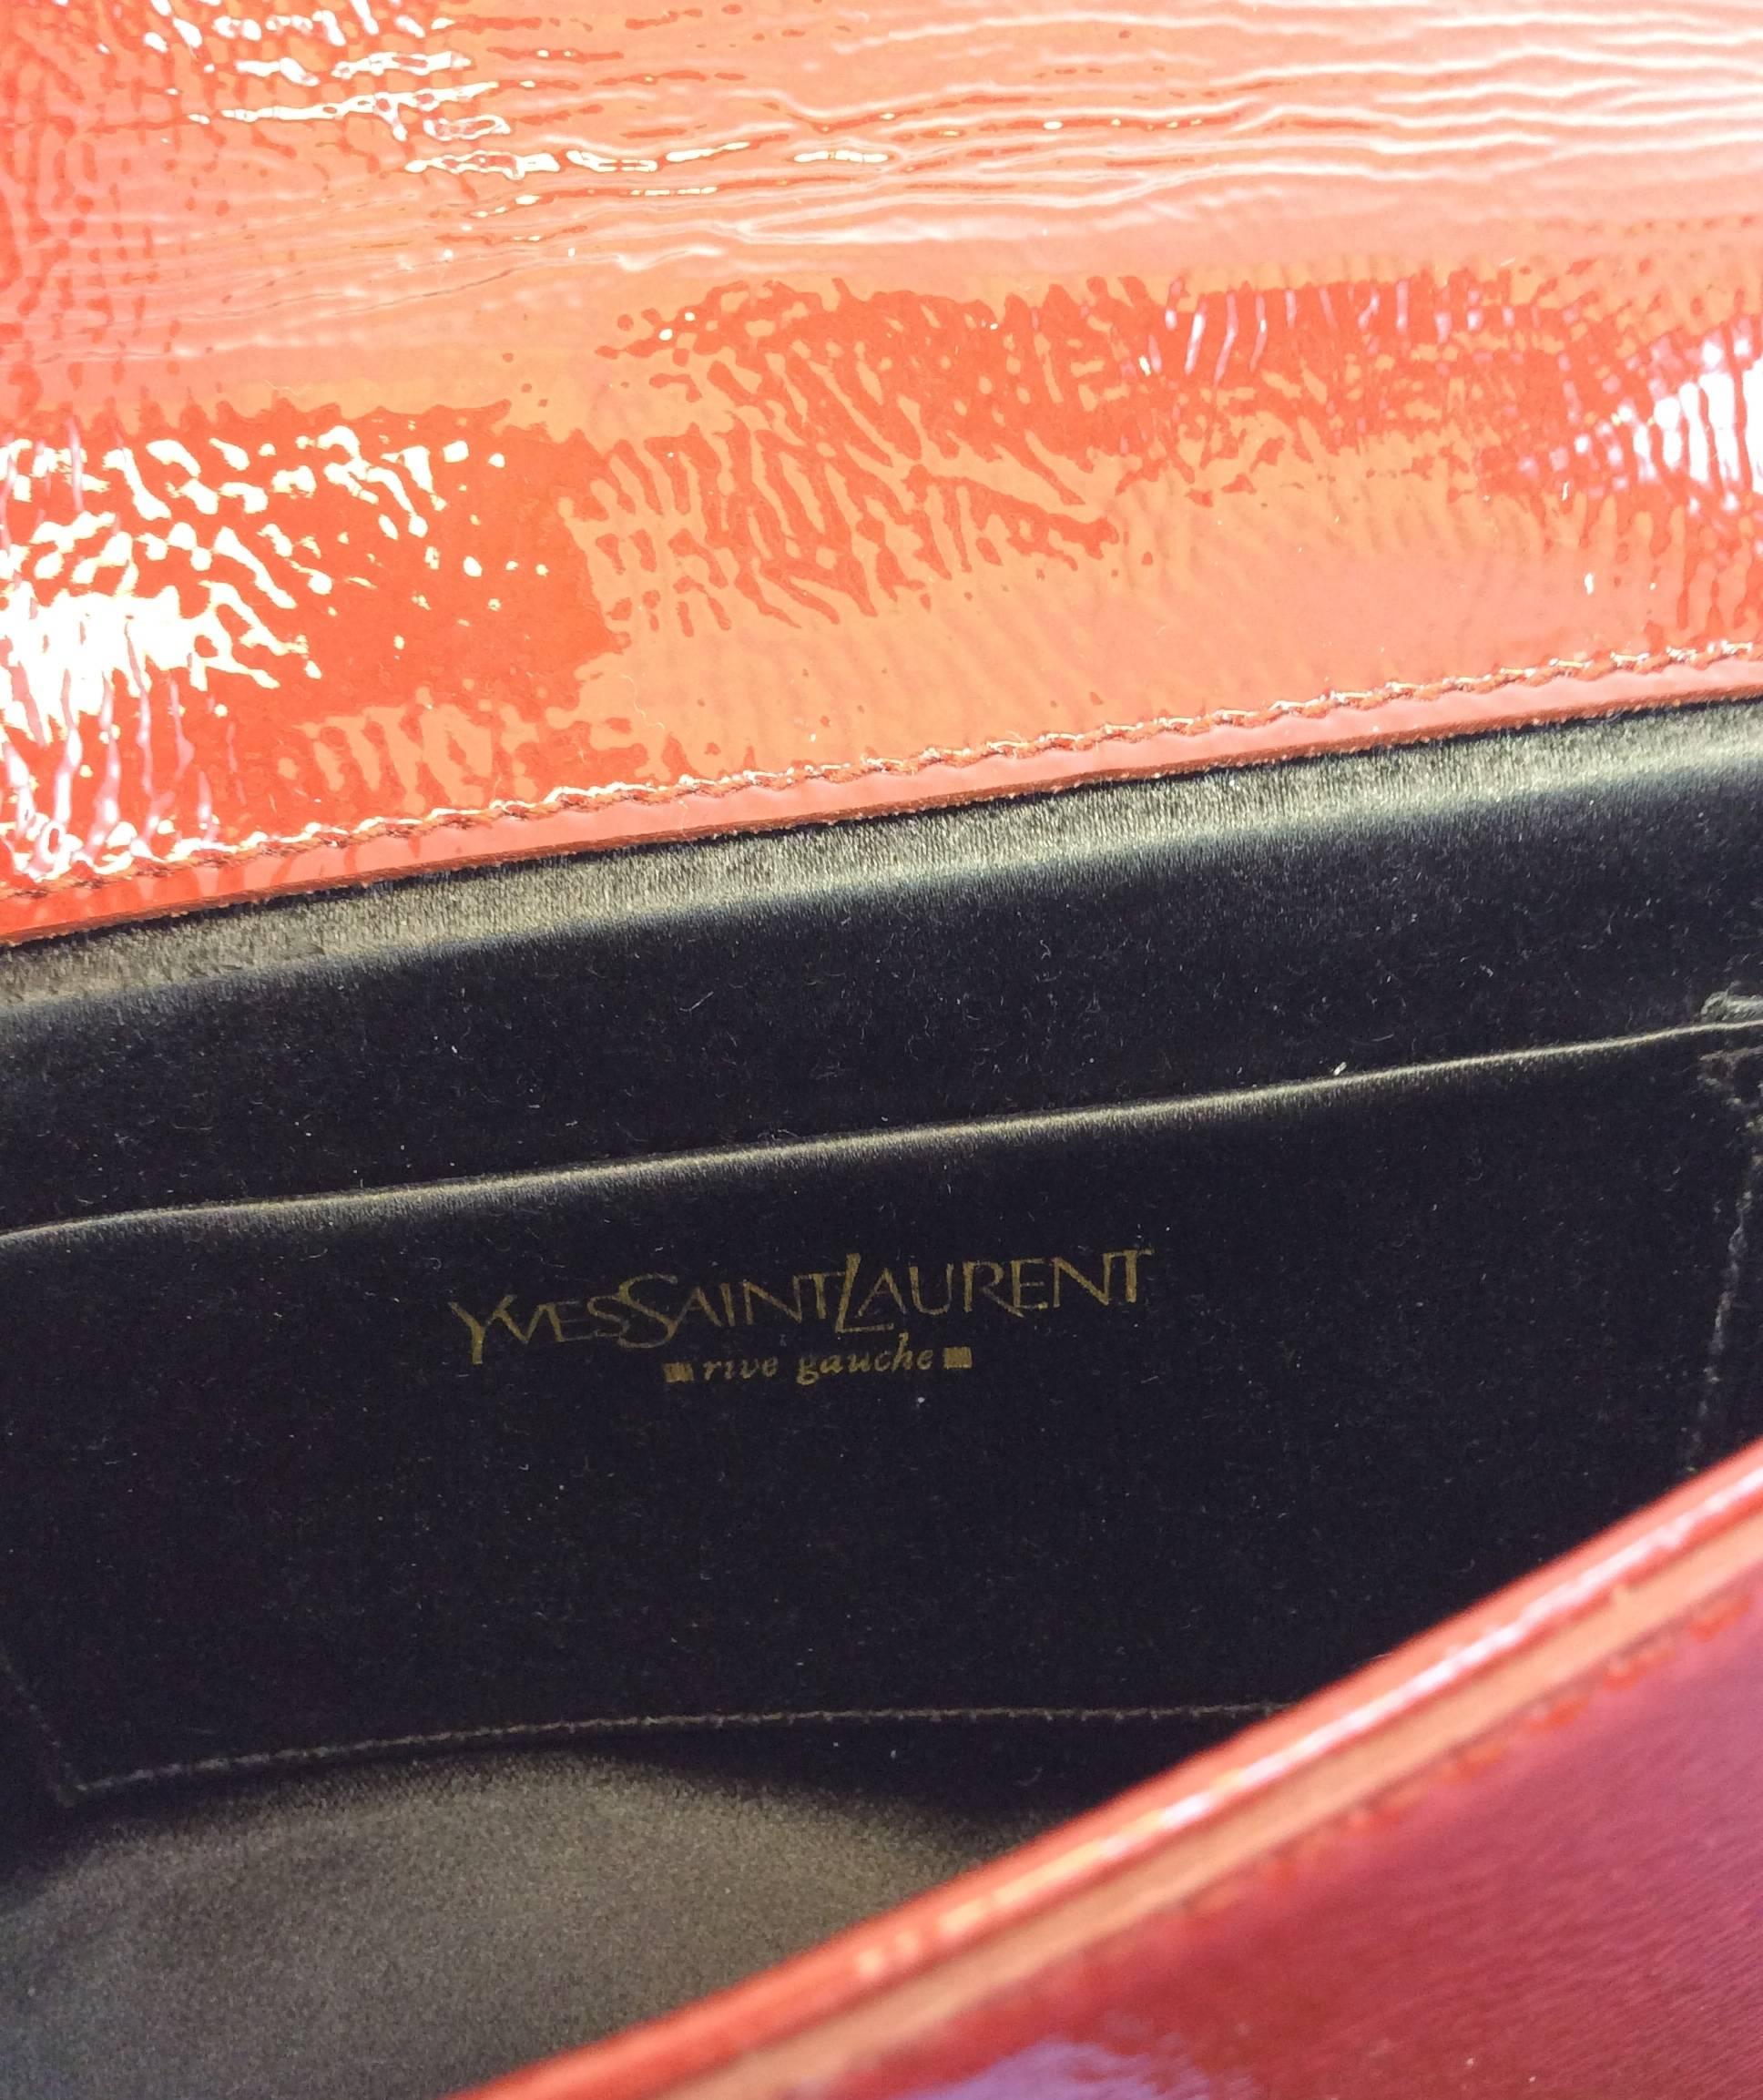 Yves Saint Laurent Rust Patent Leather Clutch In Excellent Condition For Sale In Narberth, PA